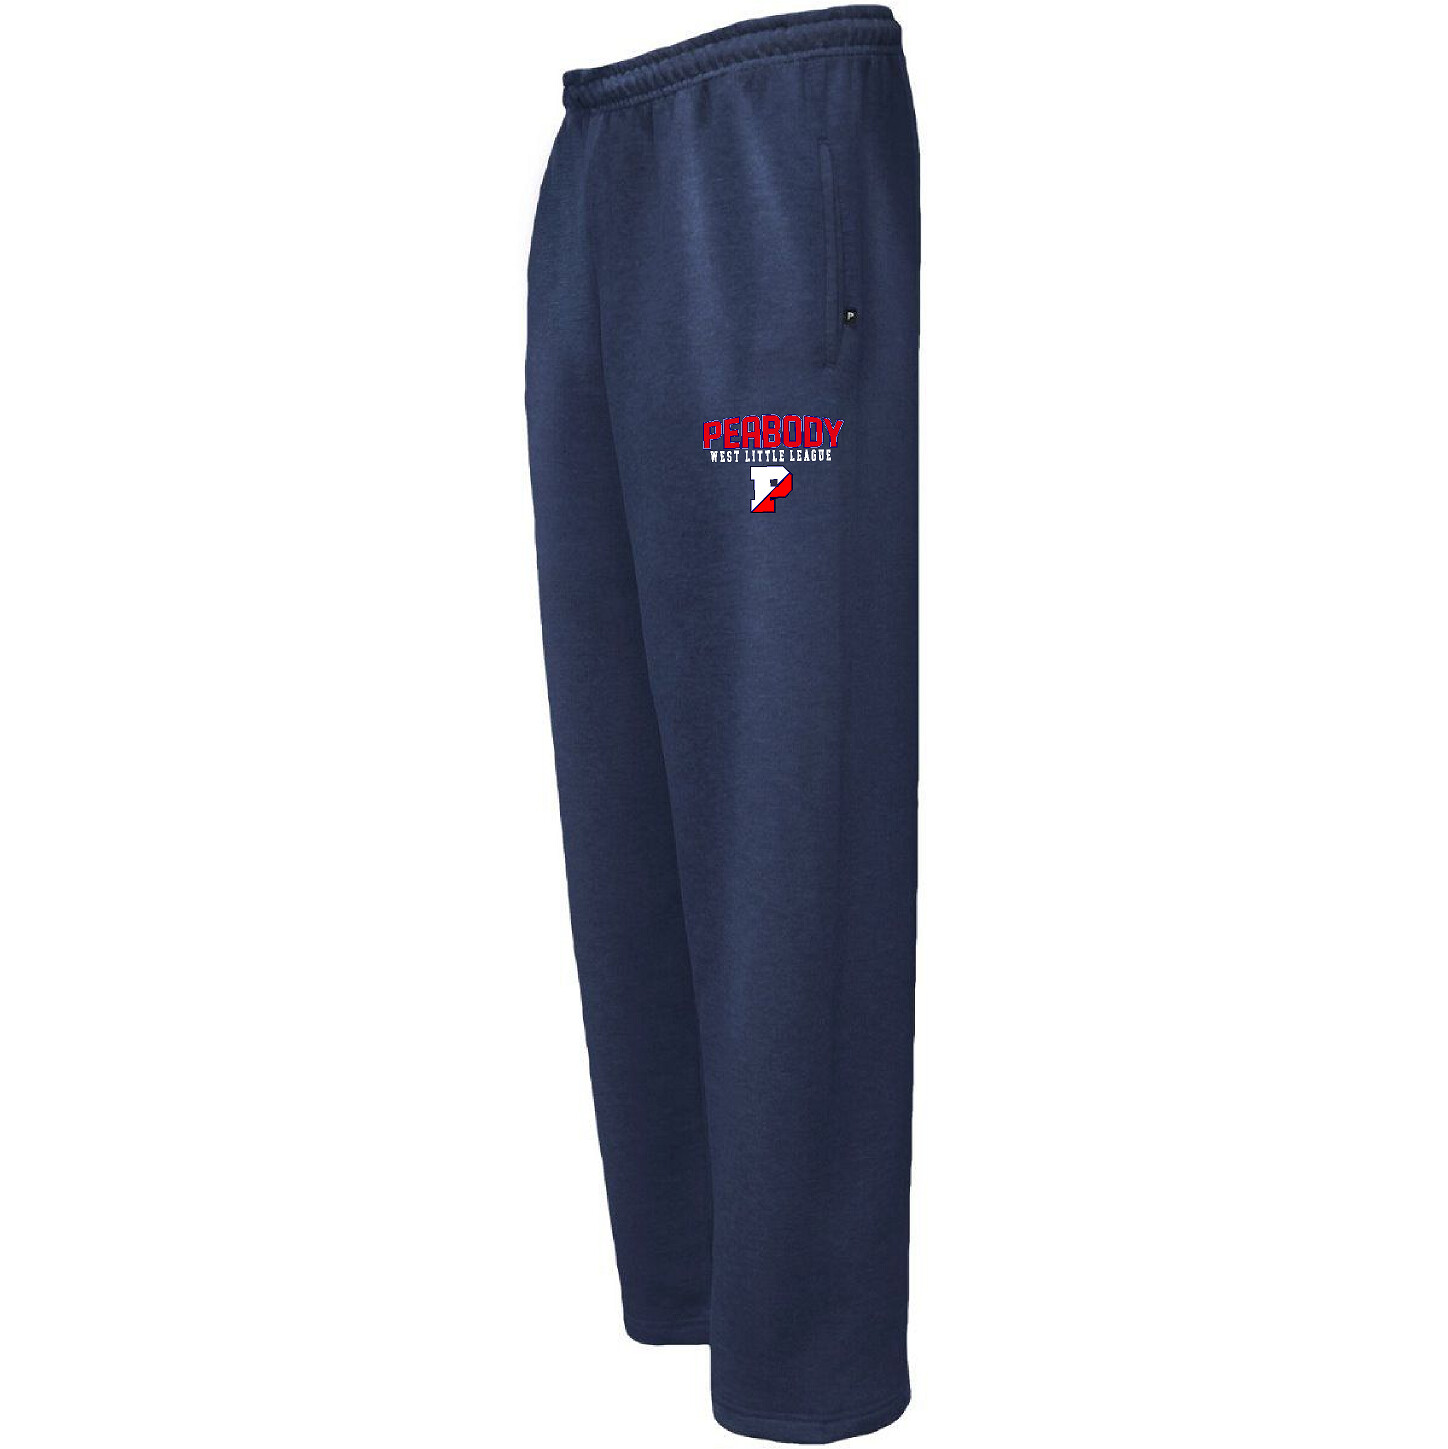 Pennant Brand Peabody West Little League Embroidered Open Bottom Sweatpant W/ Pocket